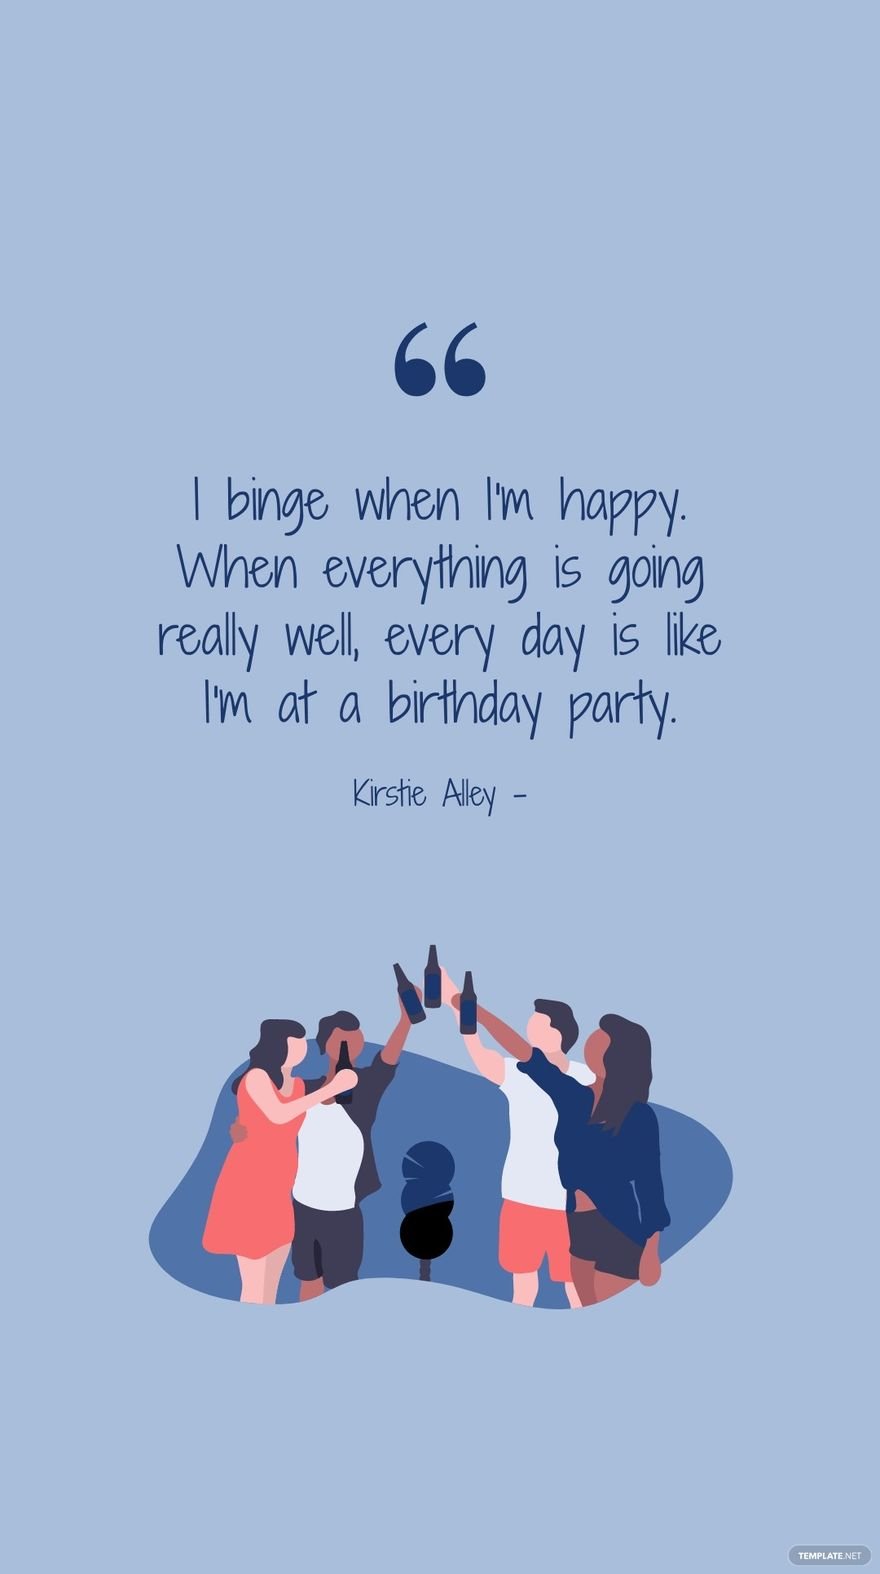 Kirstie Alley - I binge when I'm happy. When everything is going really well, every day is like I'm at a birthday party.